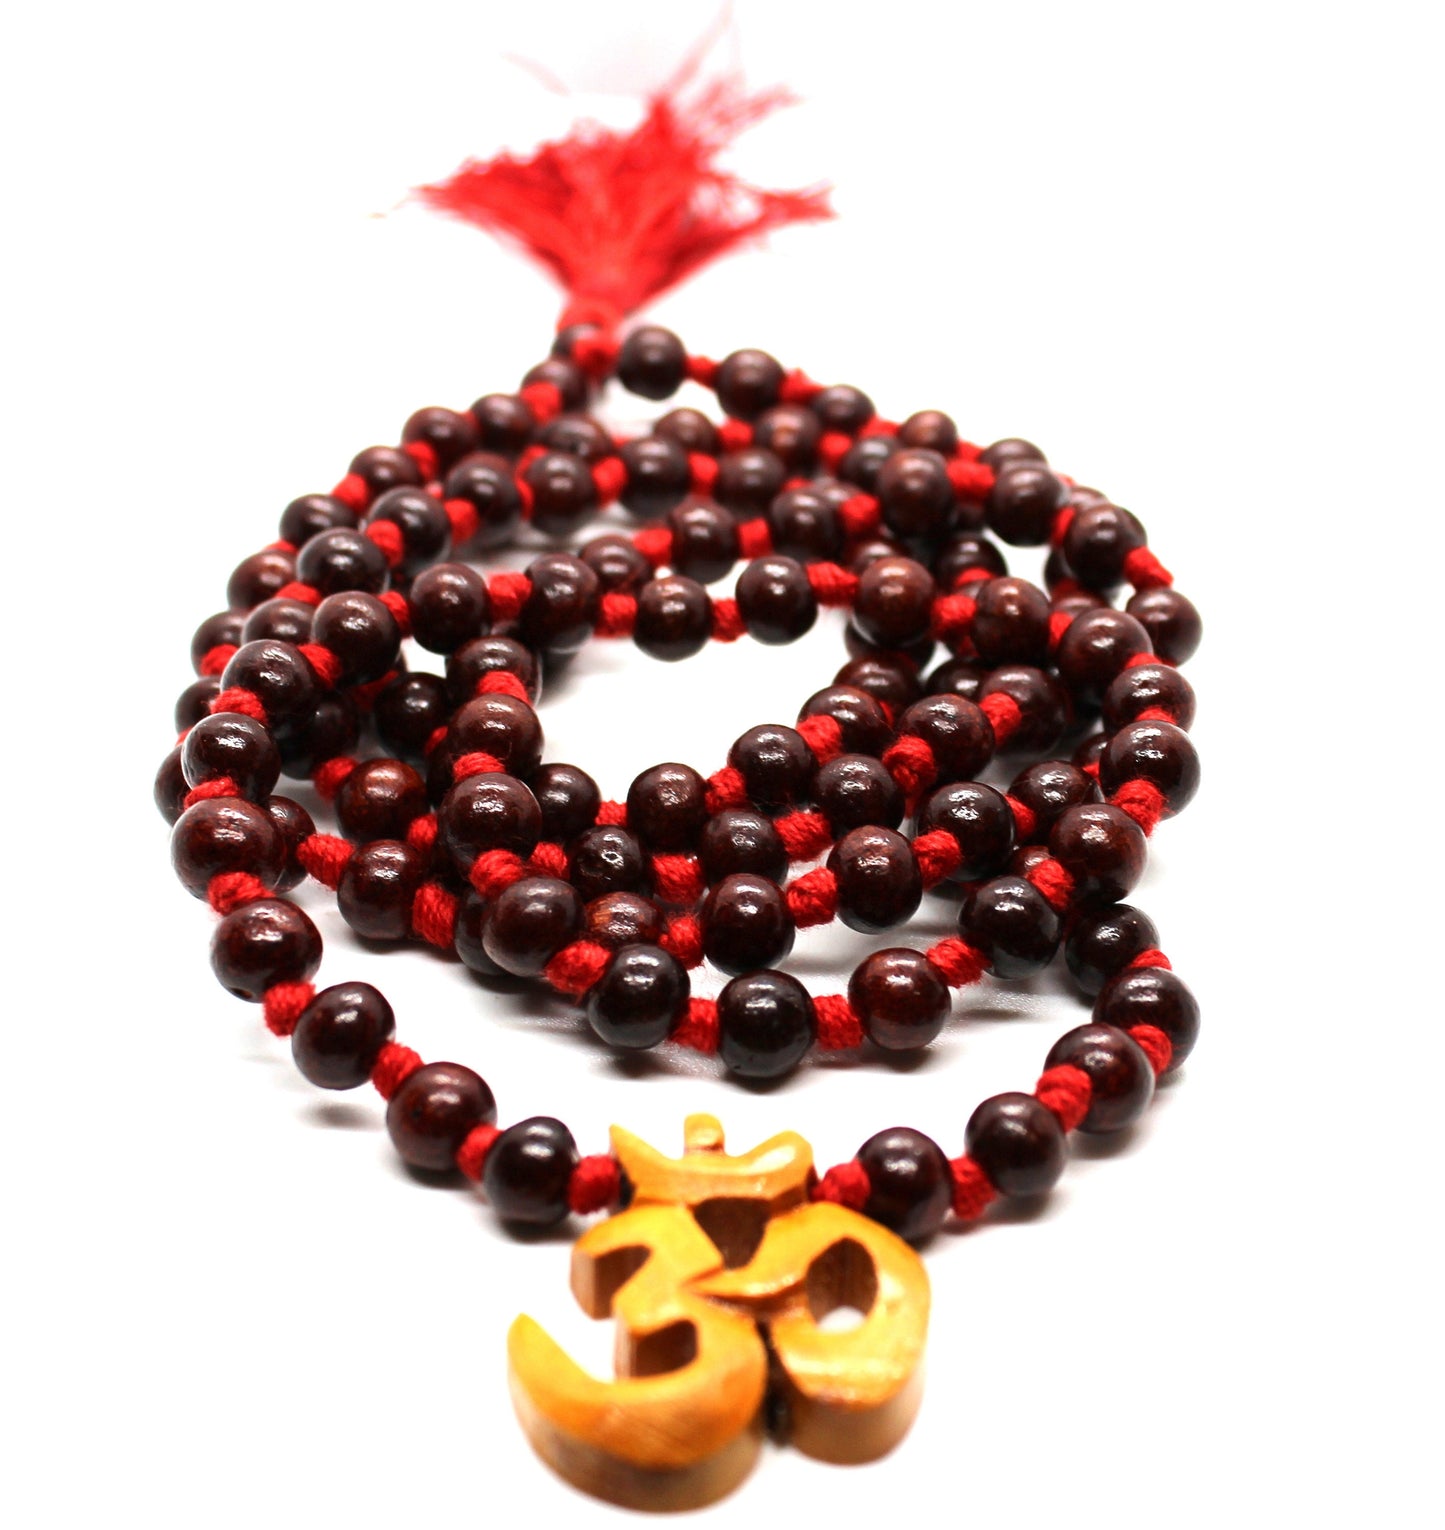 Rosewood Knotted Mala 108+1 Beads with wooden OM charm - Handmade knotted rosewood Mala necklace- yoga meditation beads - 8MM Rosewood Mala